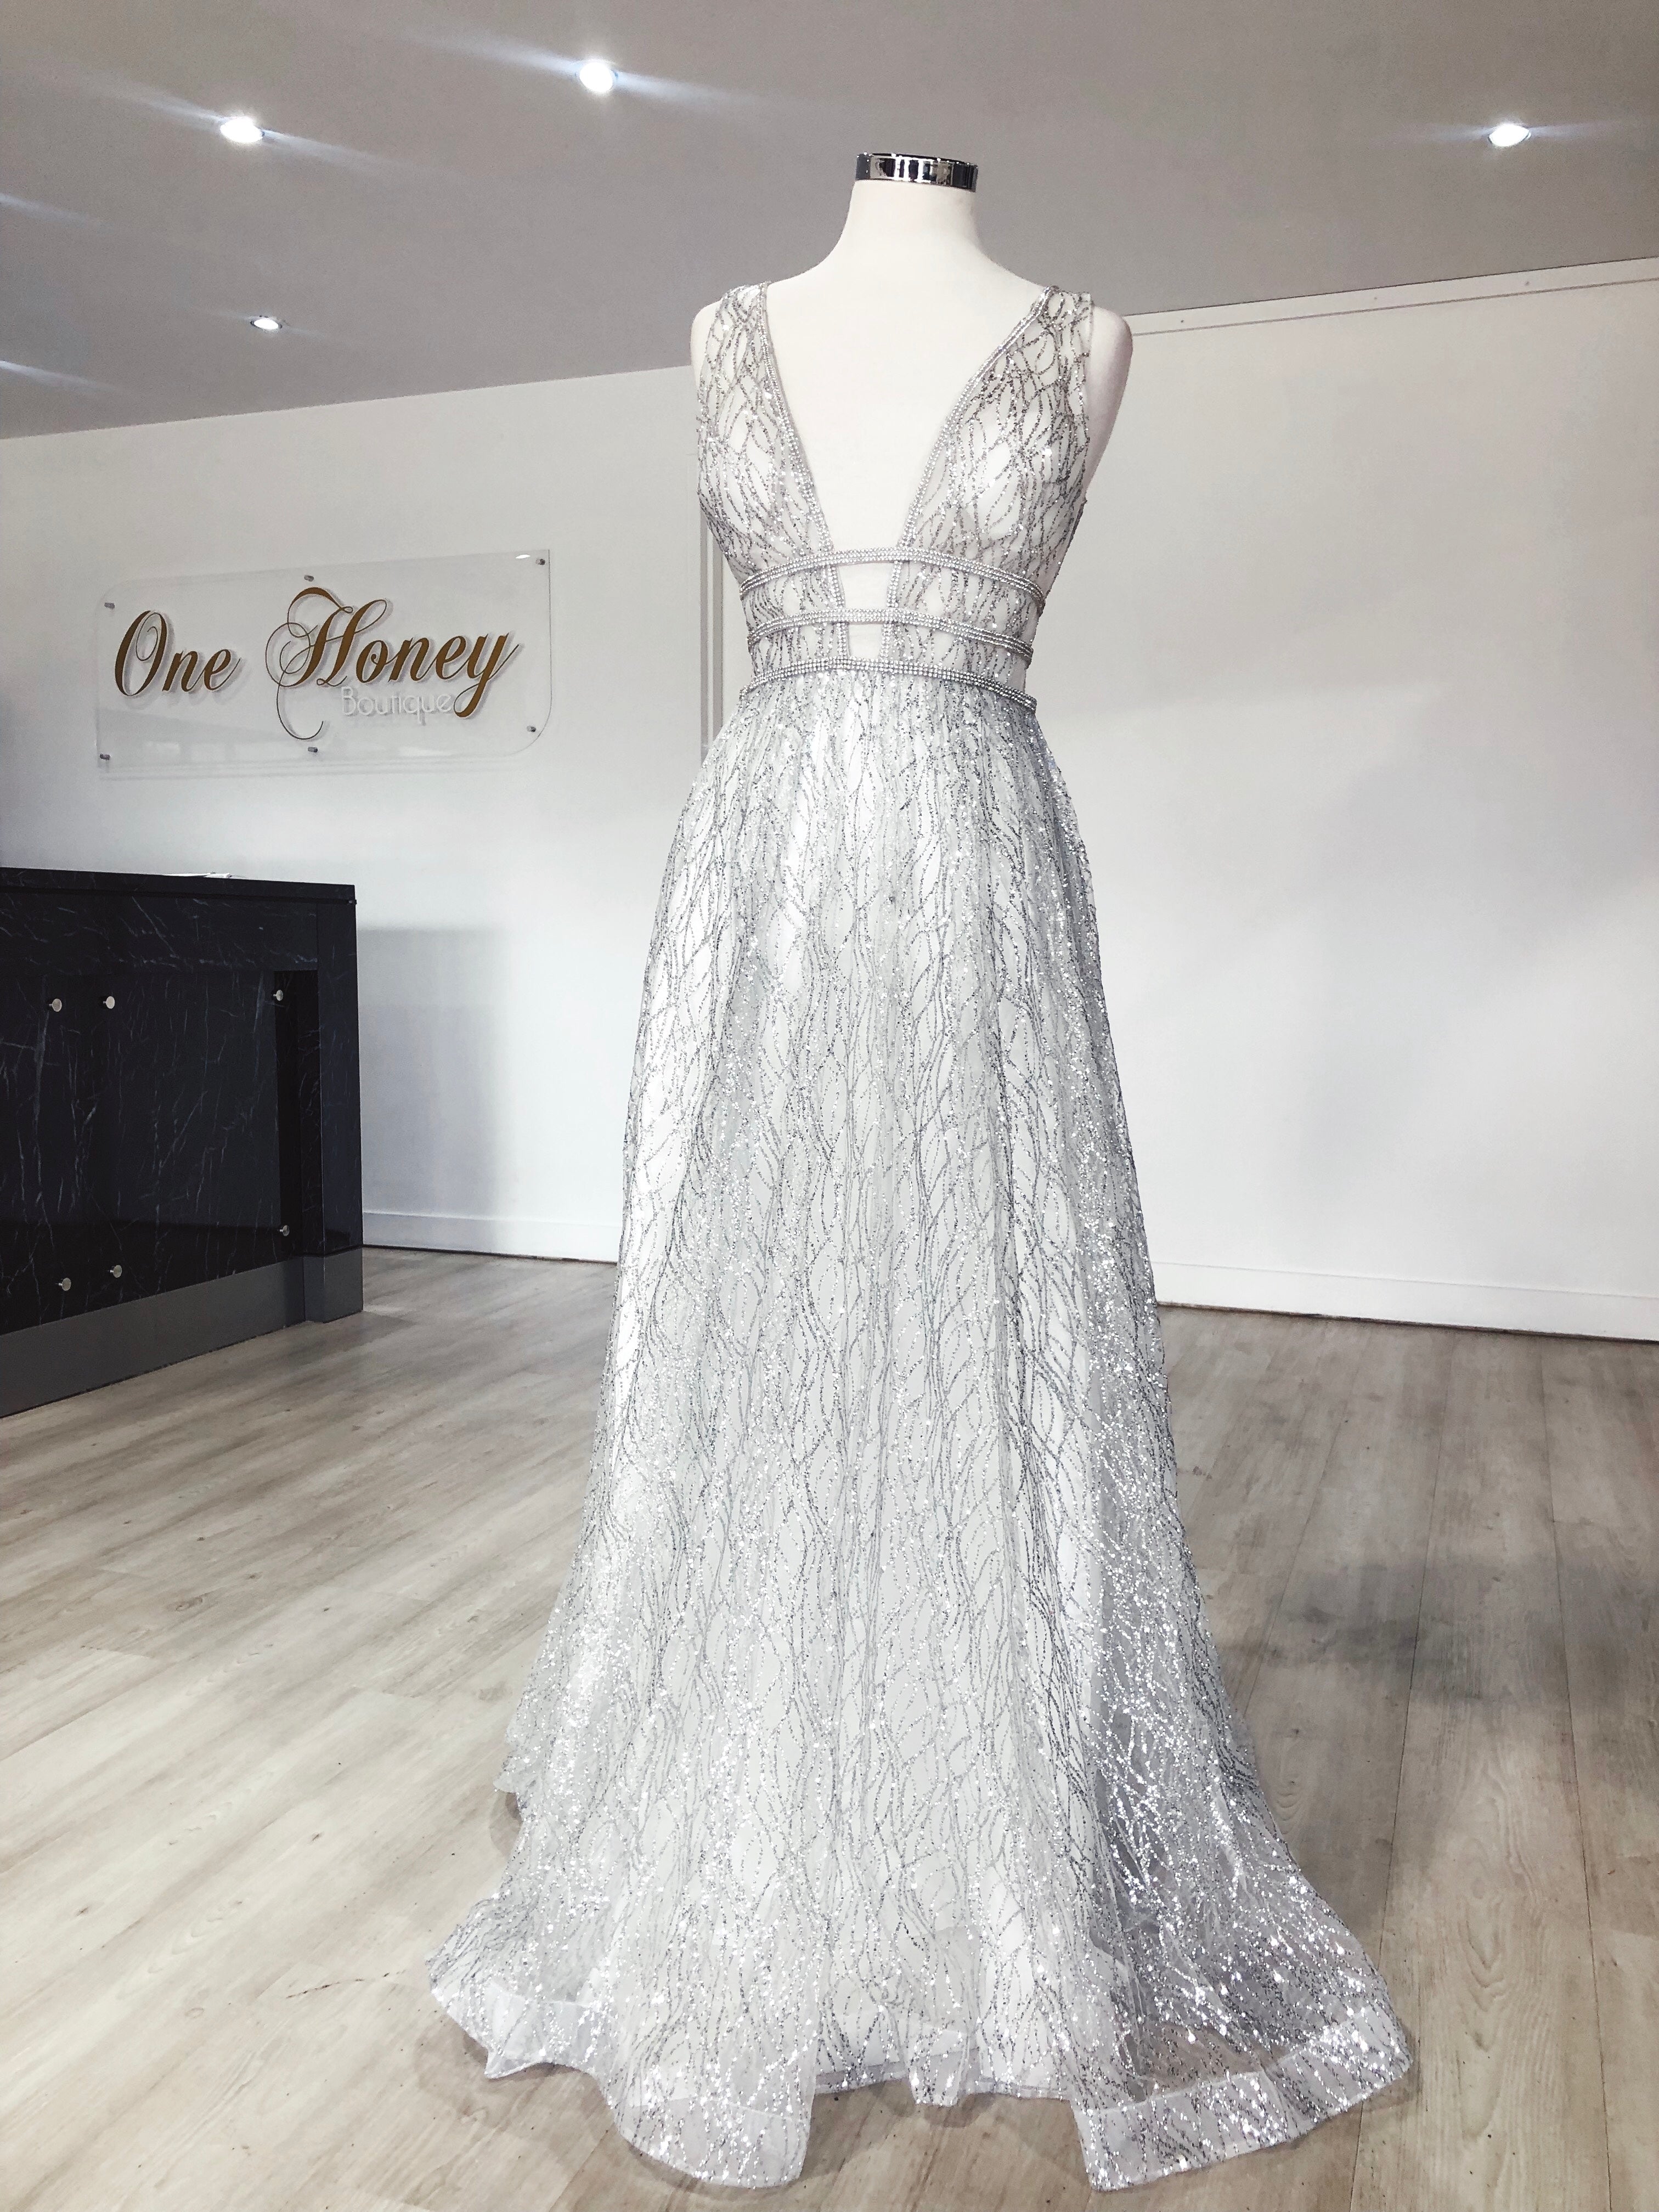 Honey Couture ENYA White &amp; Silver Glitter Formal Gown Private Label$ AfterPay Humm ZipPay LayBuy Sezzle